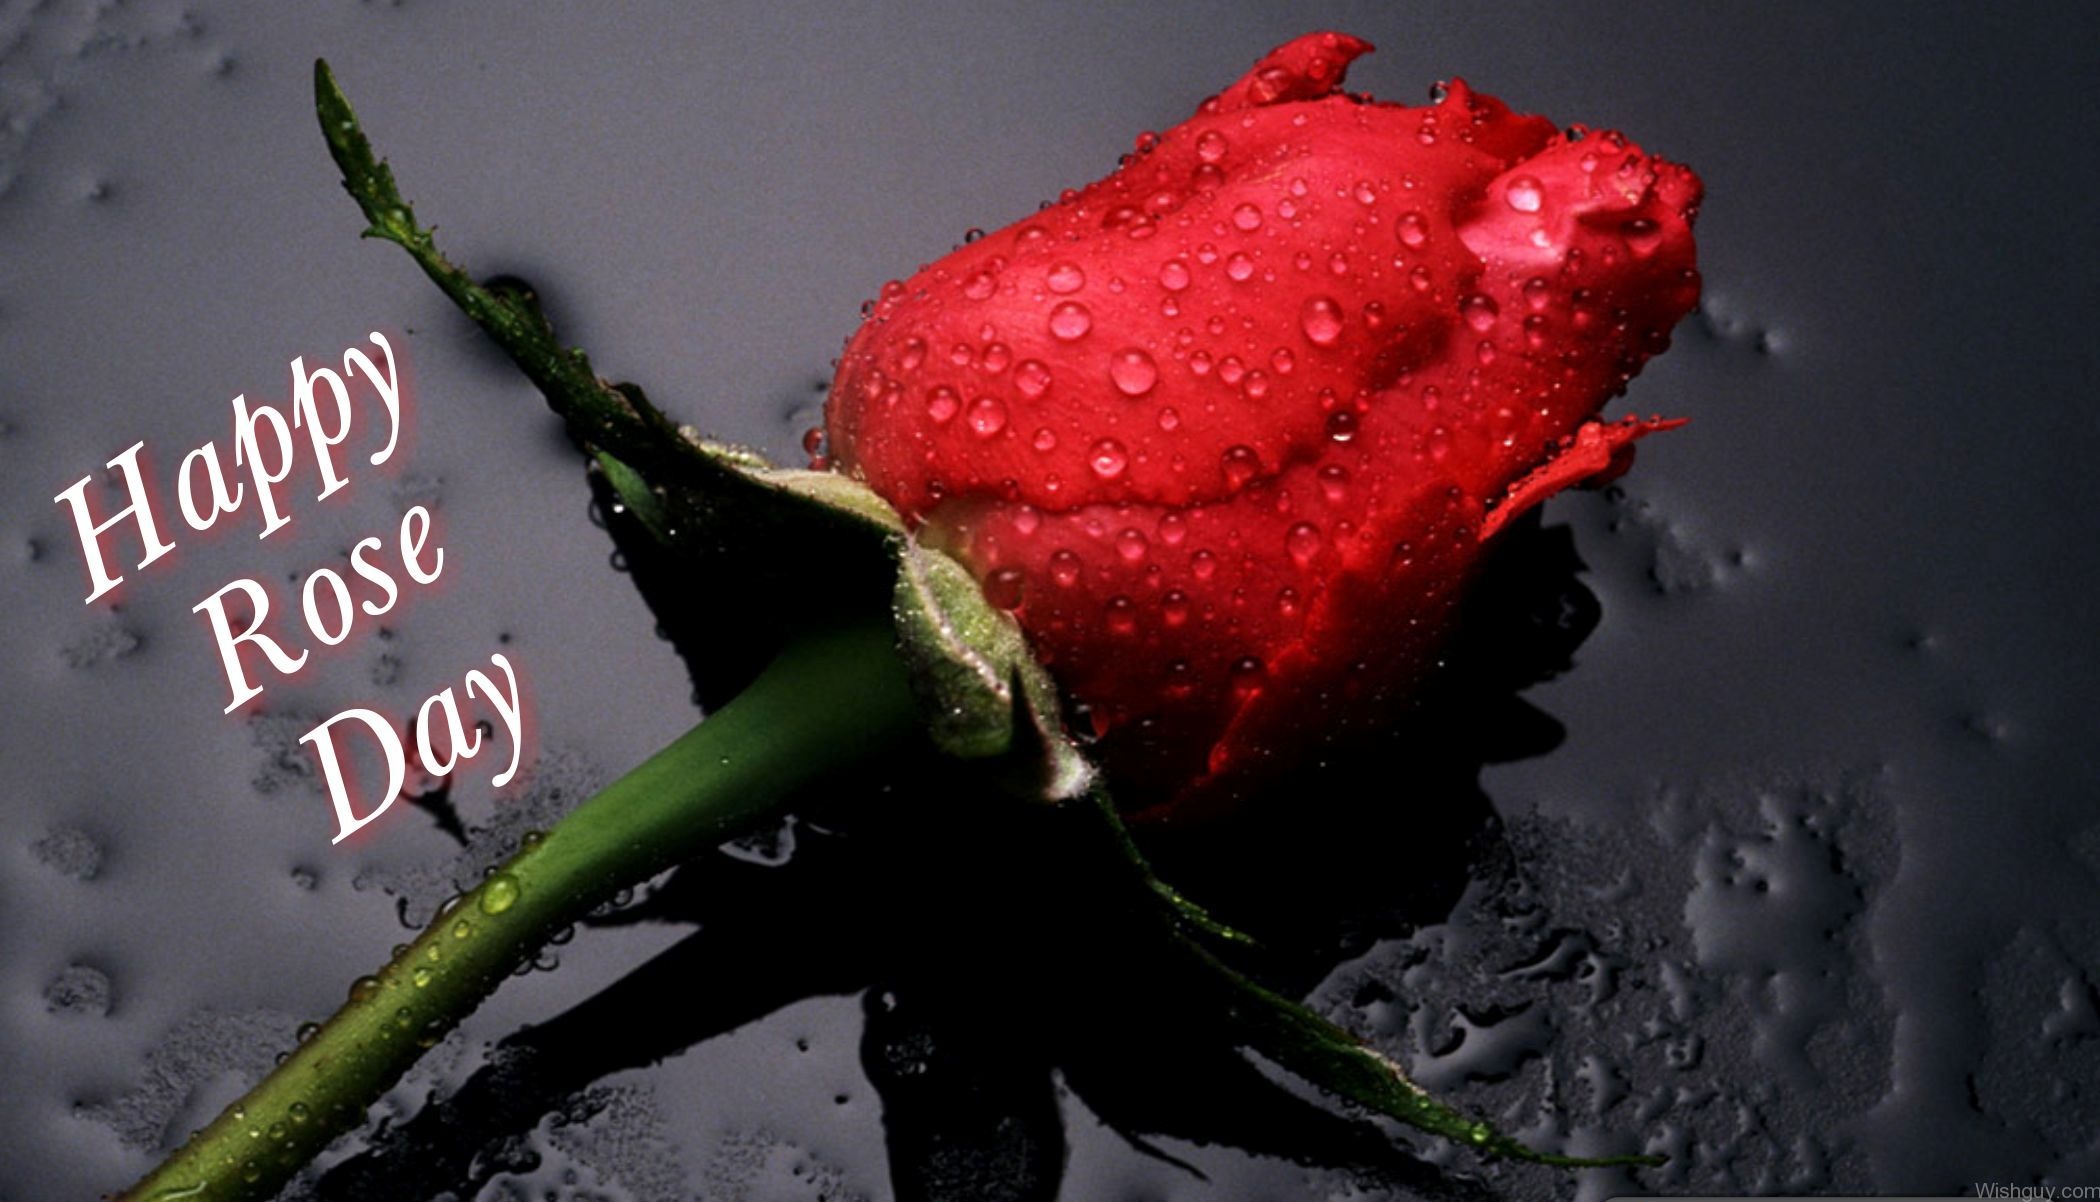 Image Of Happy Rose Day - Wishes, Greetings, Pictures – Wish Guy